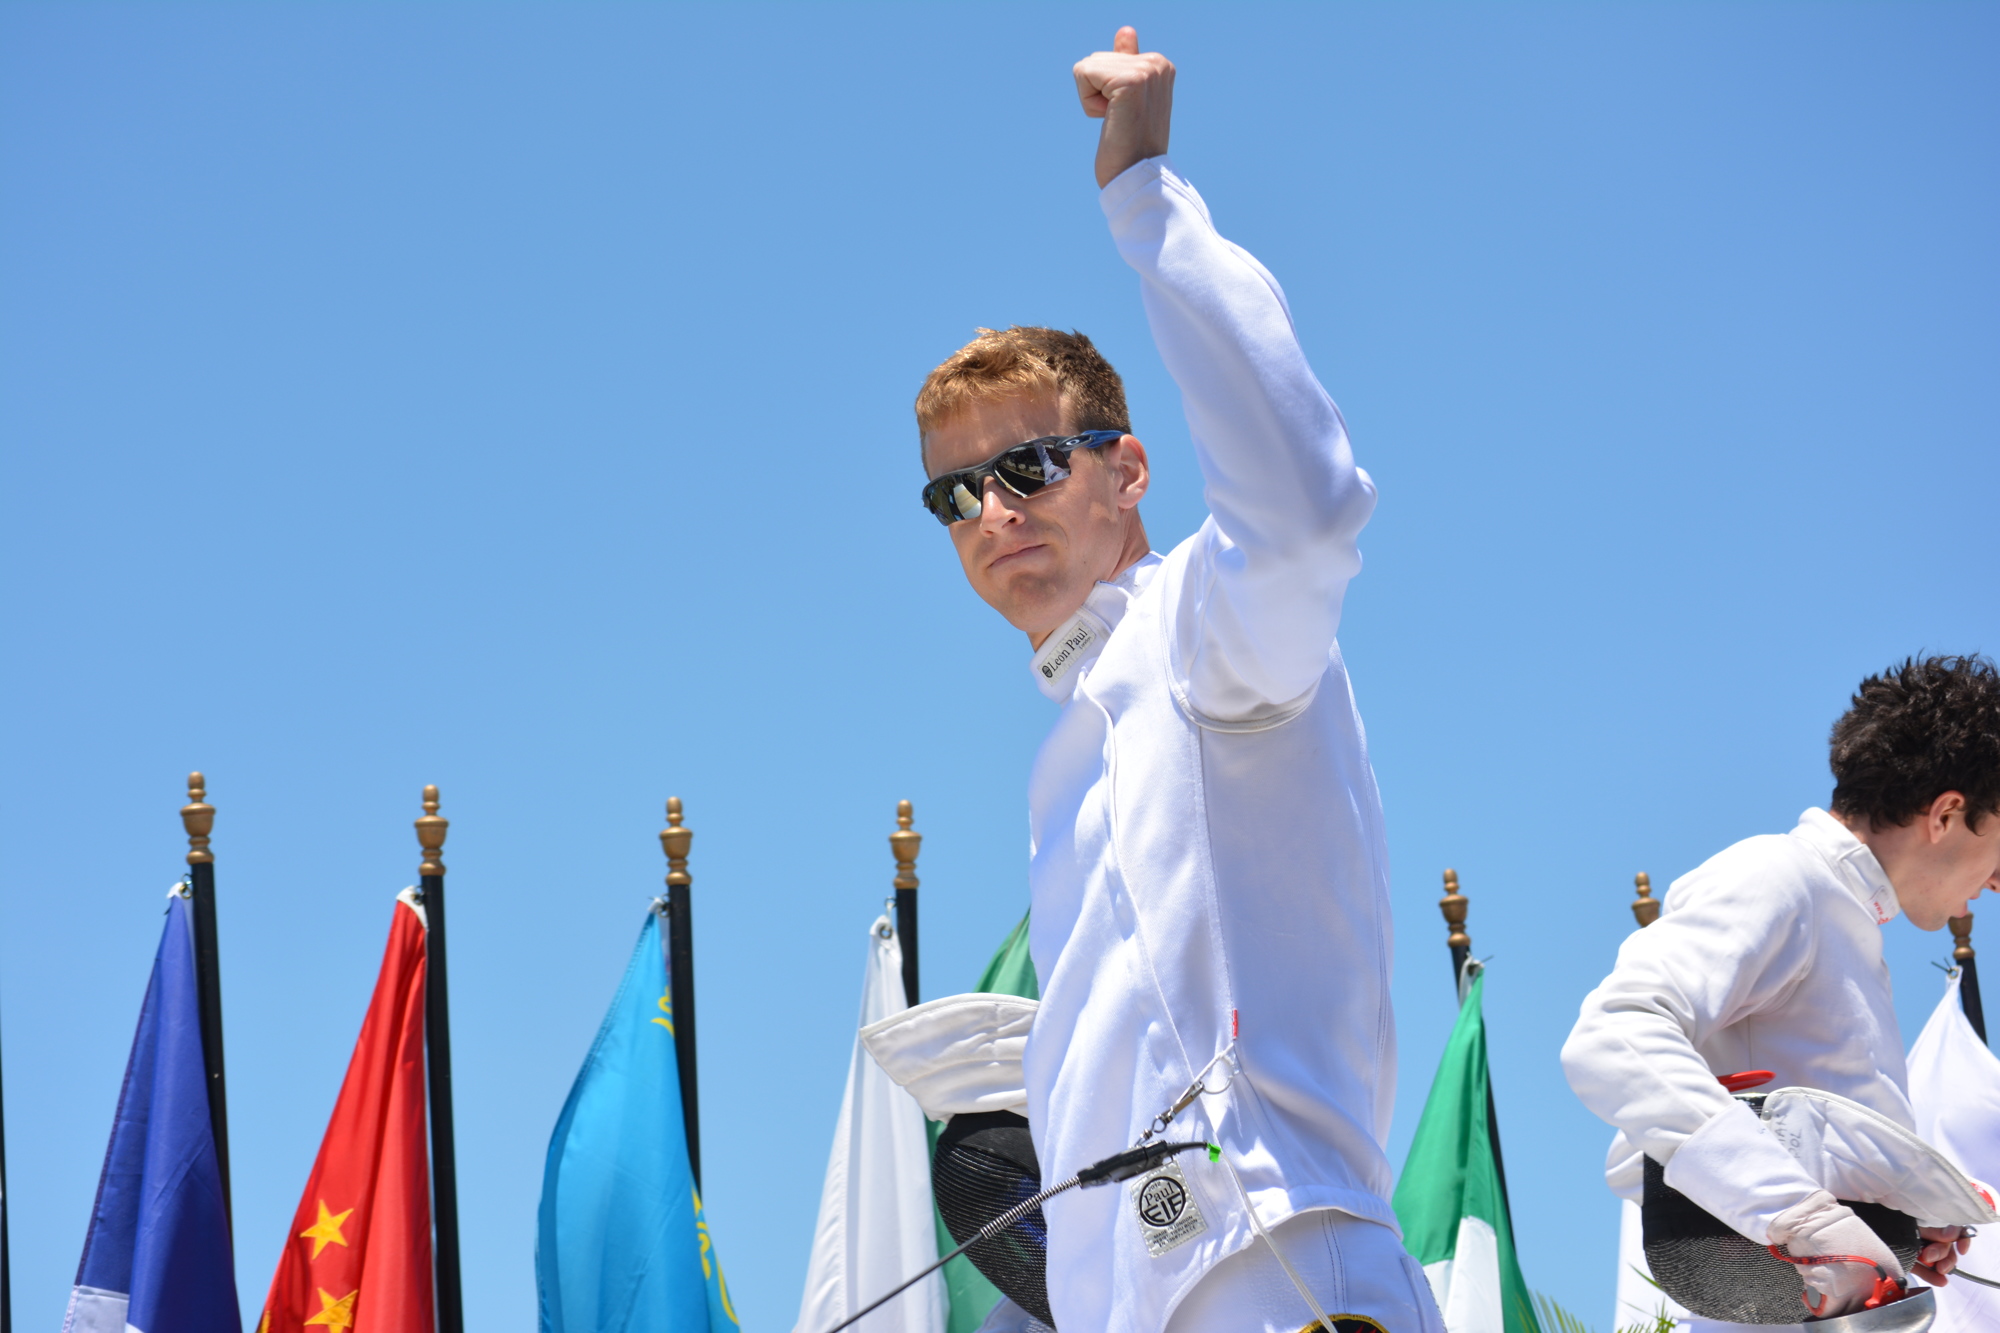 Lucas Schrimsher celebrates a fencing win over China's Jiahao Han.